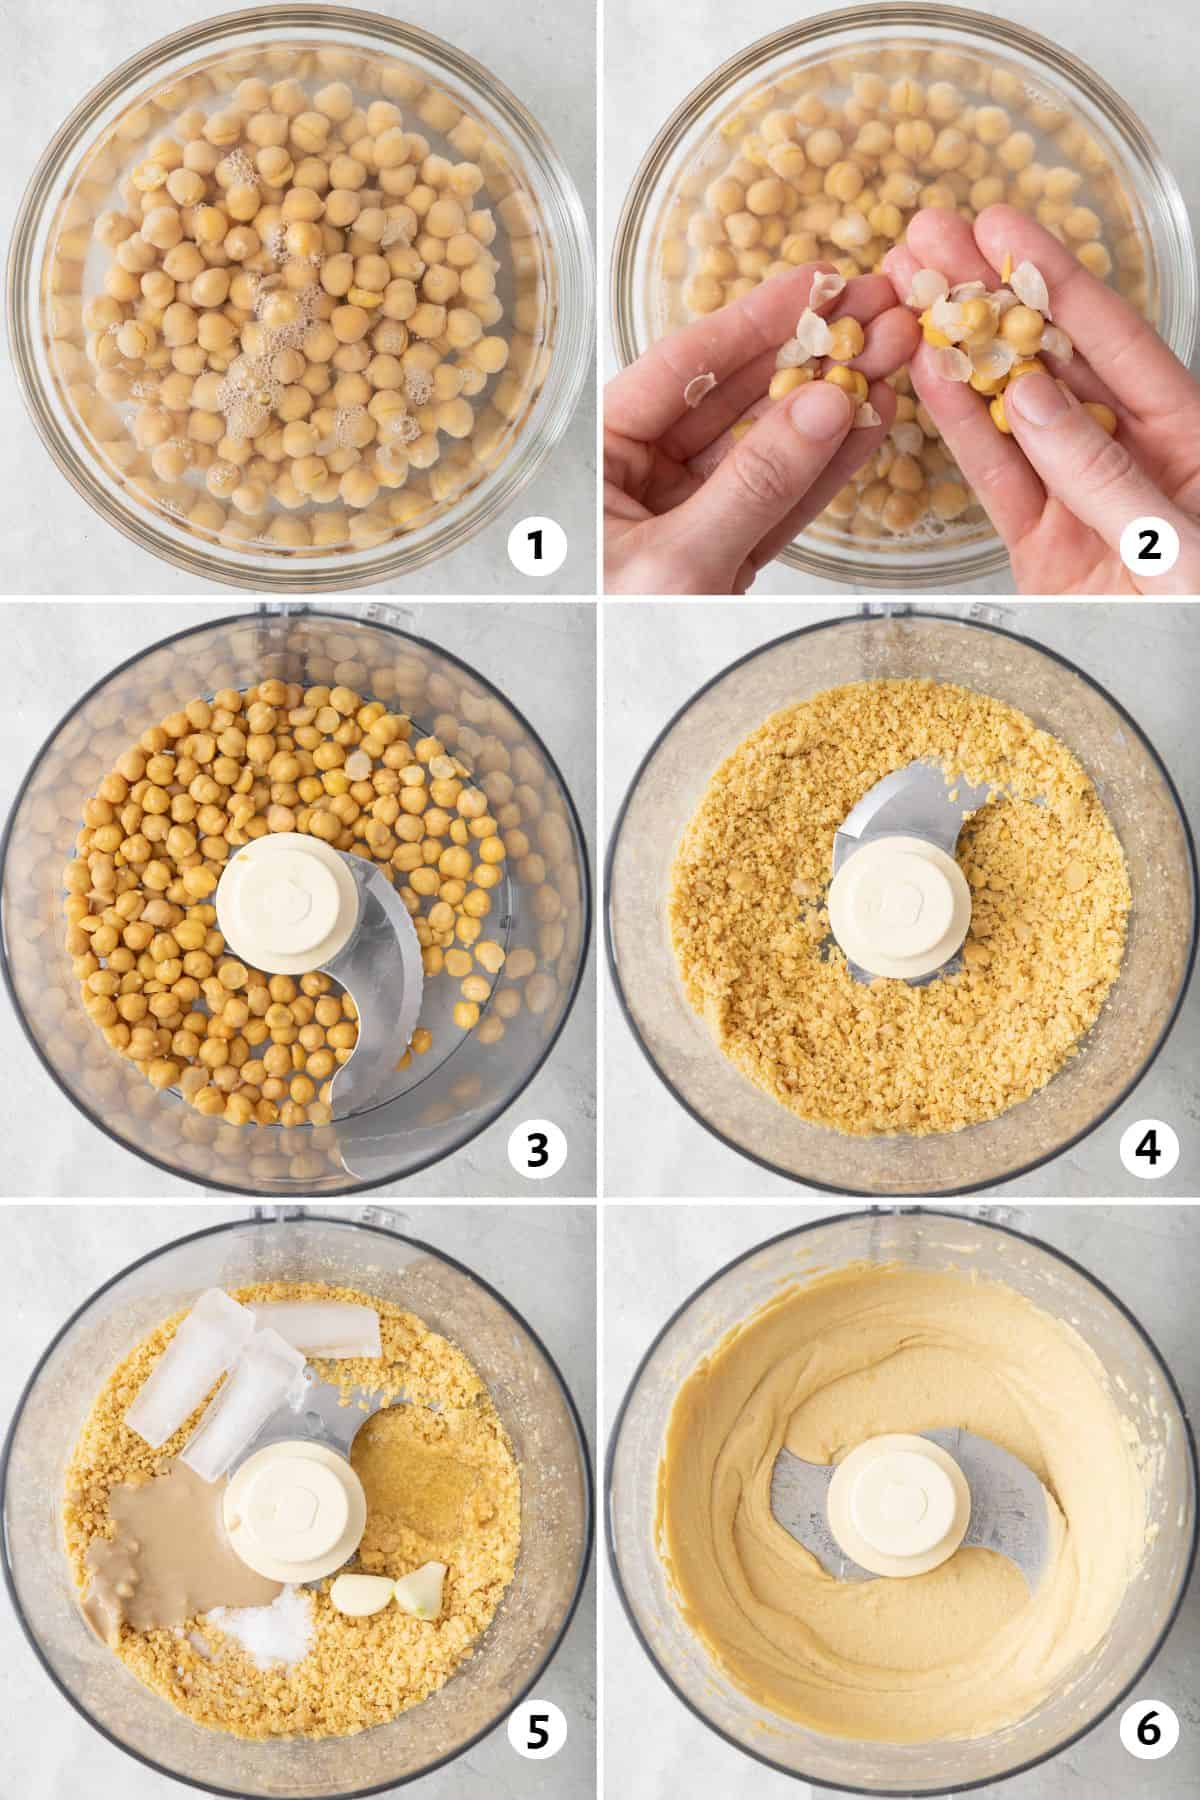 Process collage showing the chickpeas before and after removing the shell